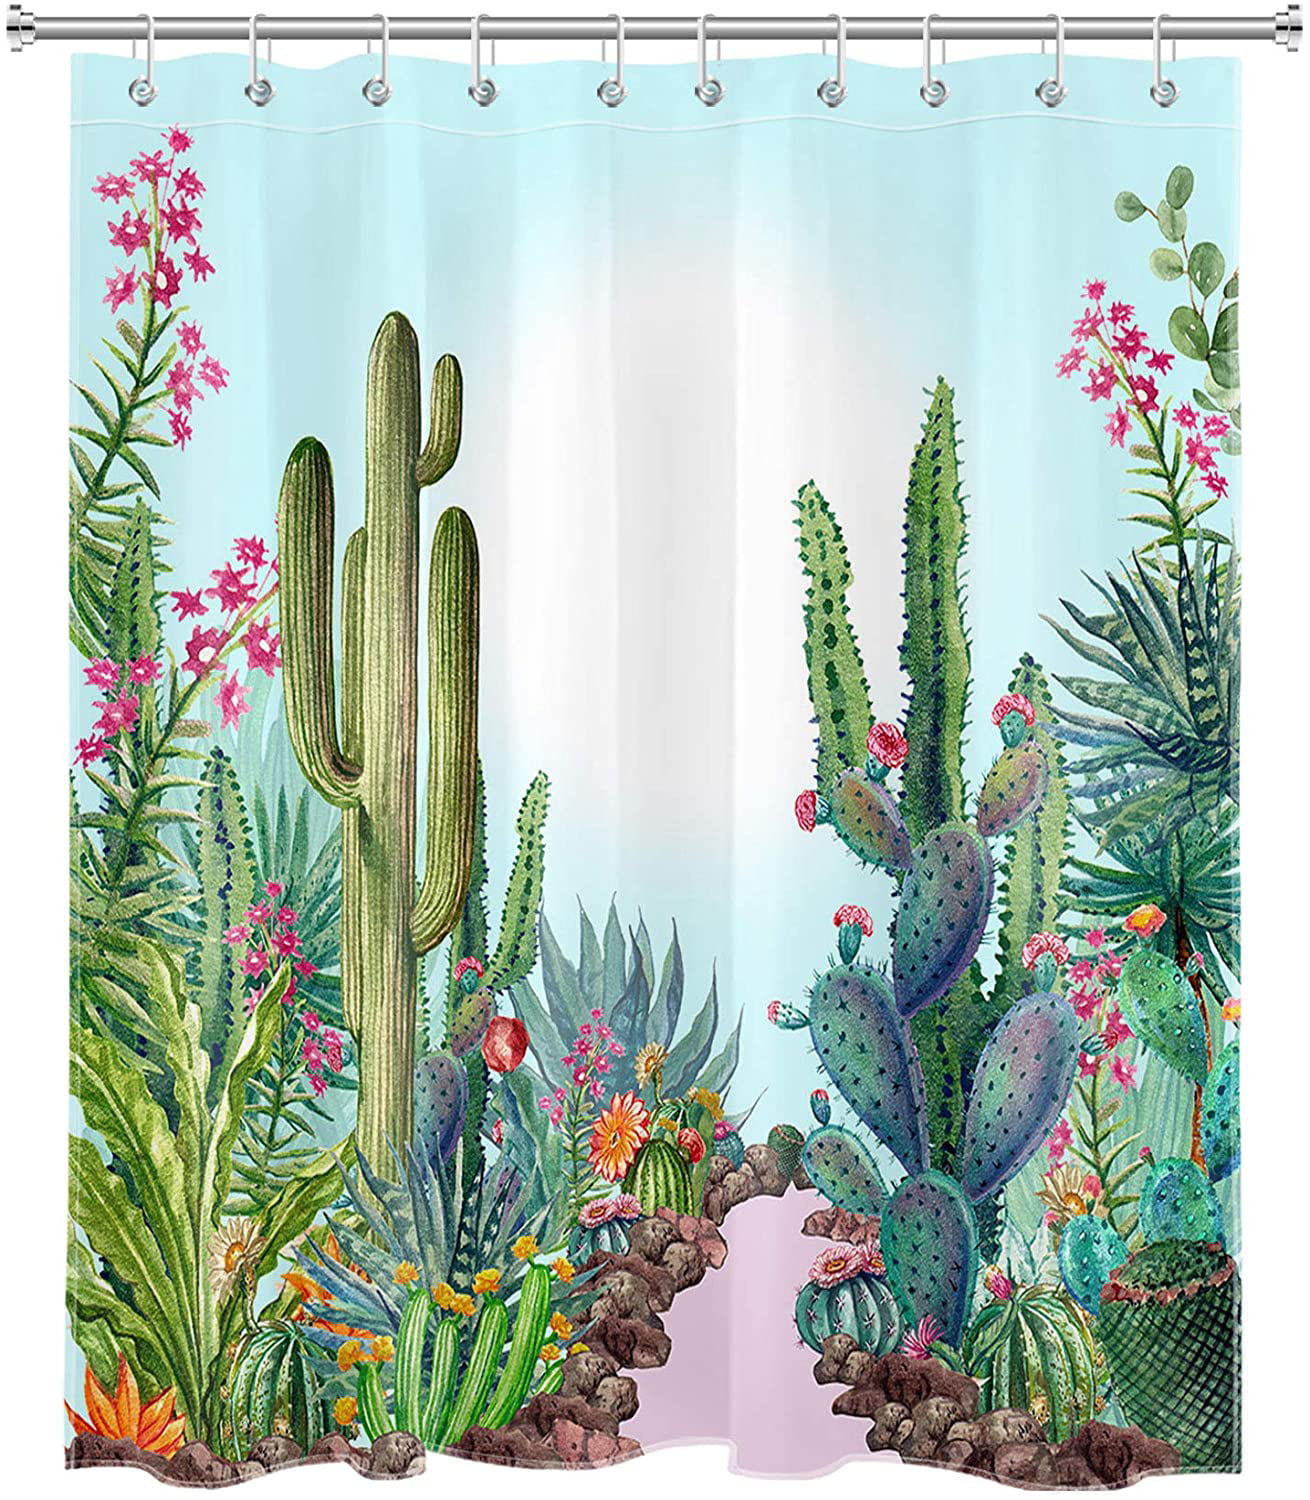 60x72" Watercolor Prickly Cactus Flowers Pattern Fabric Shower Curtain Set Hooks 